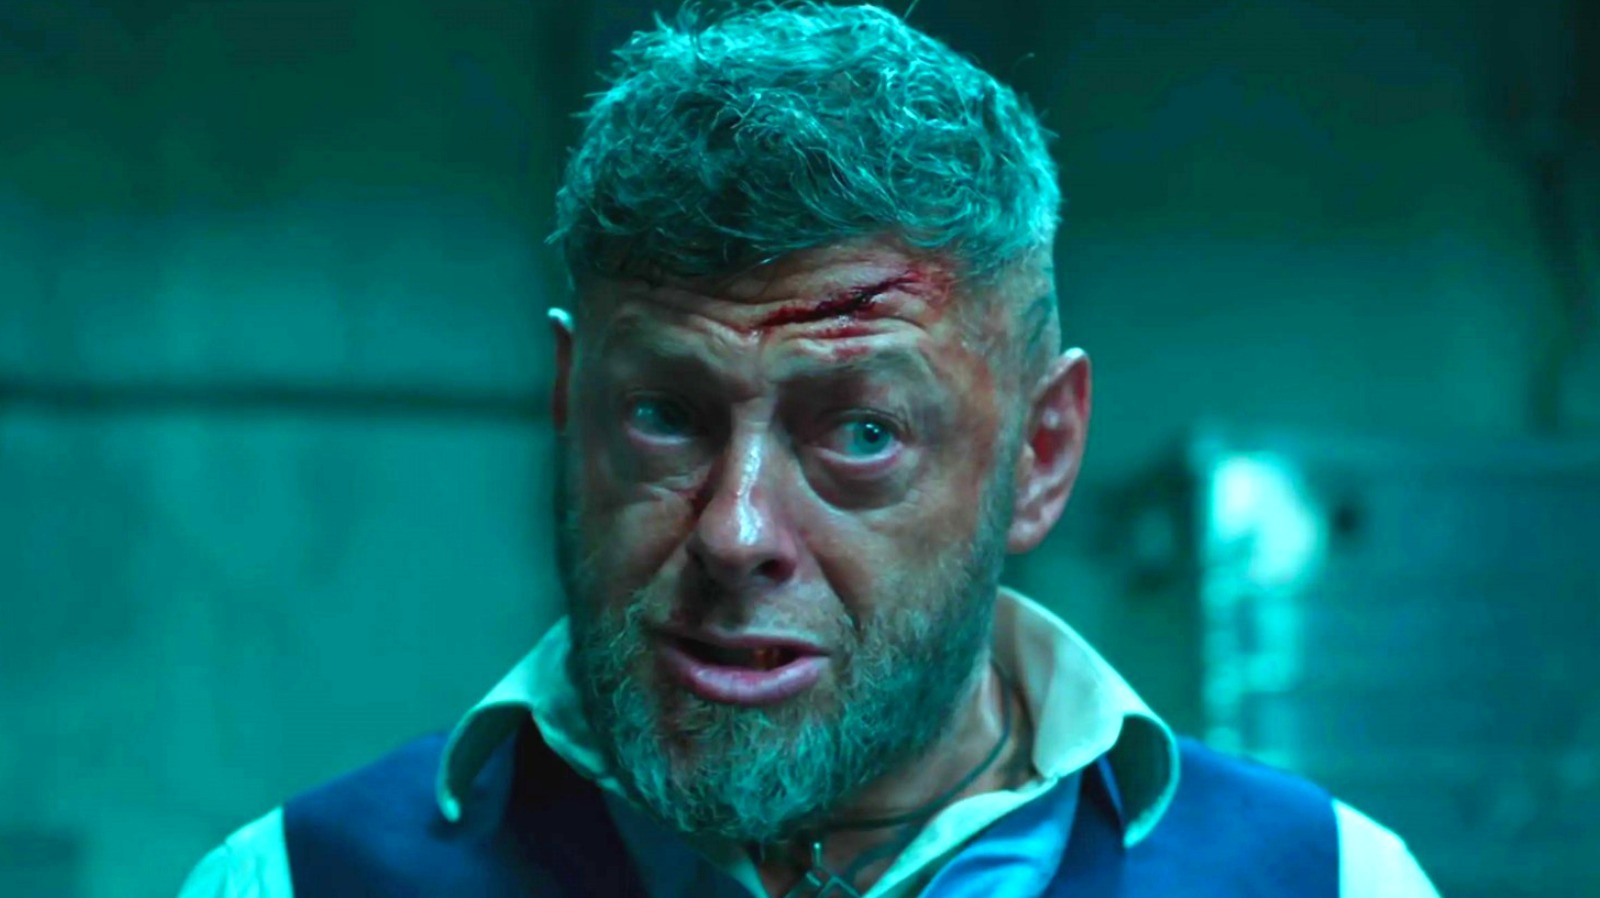 Ulysses Klaue is one of the film's bad guys. Which other Marvel movie did he appear in?